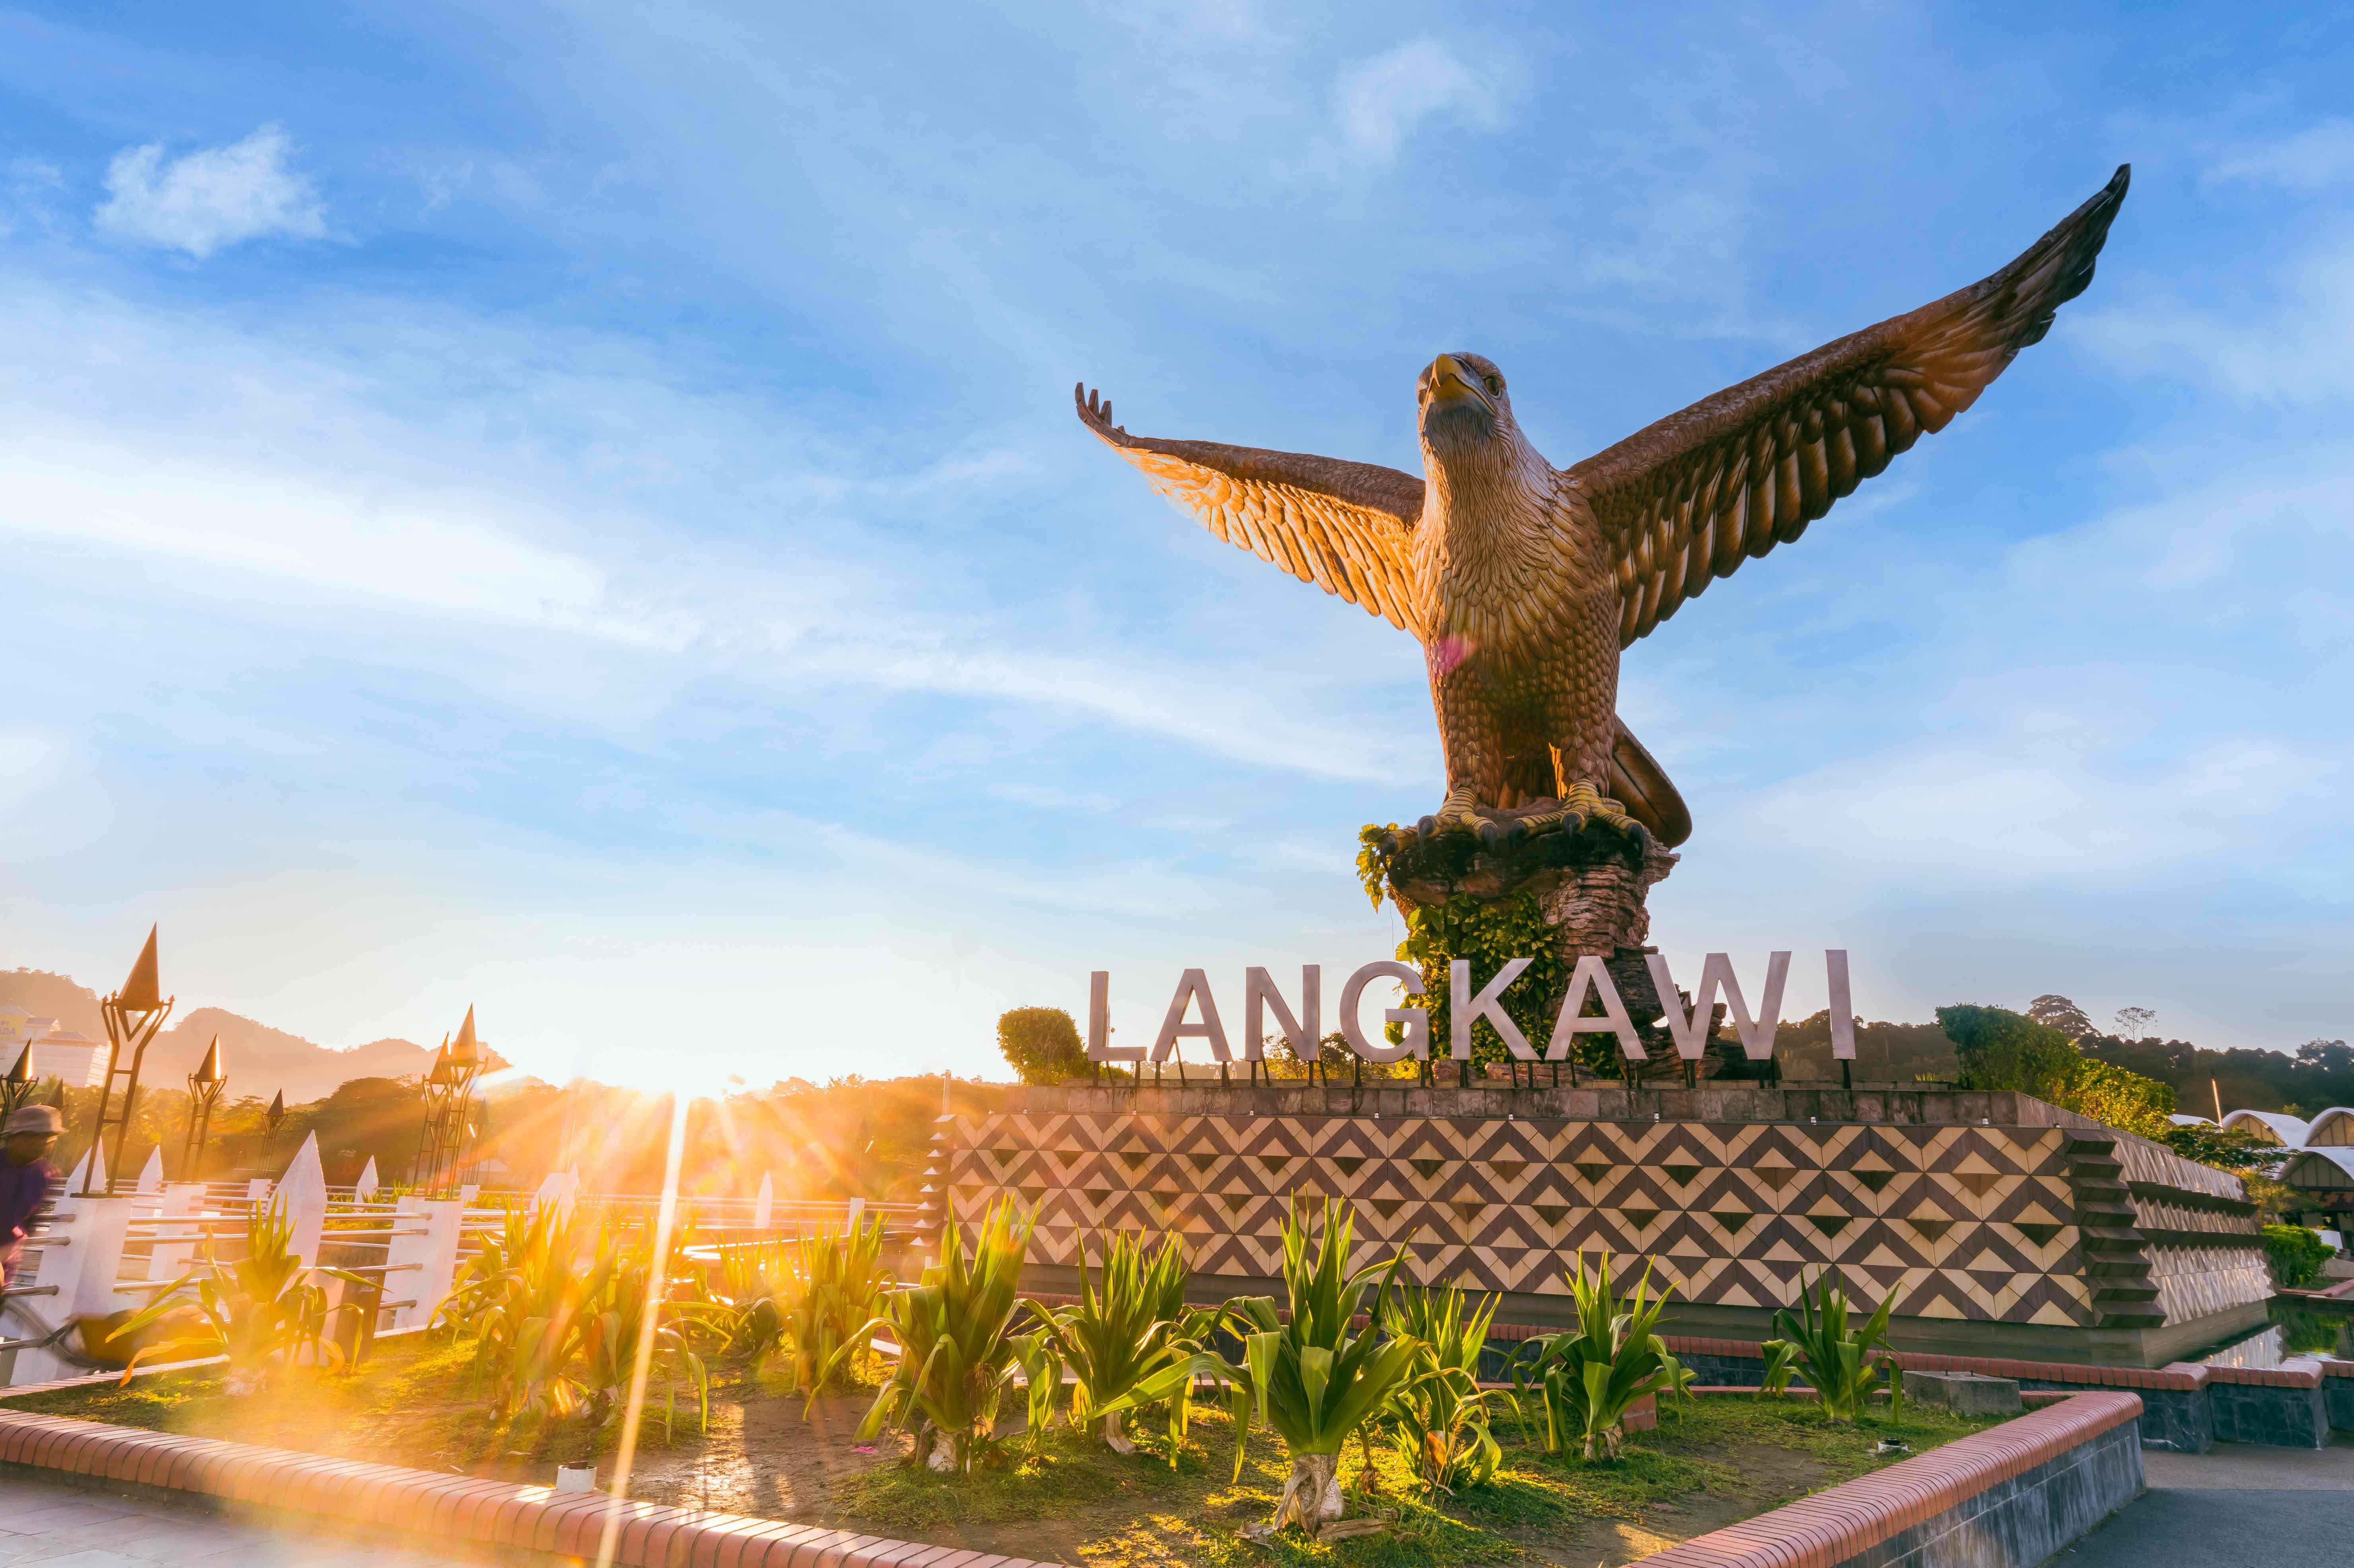 Langkawi sign and statue